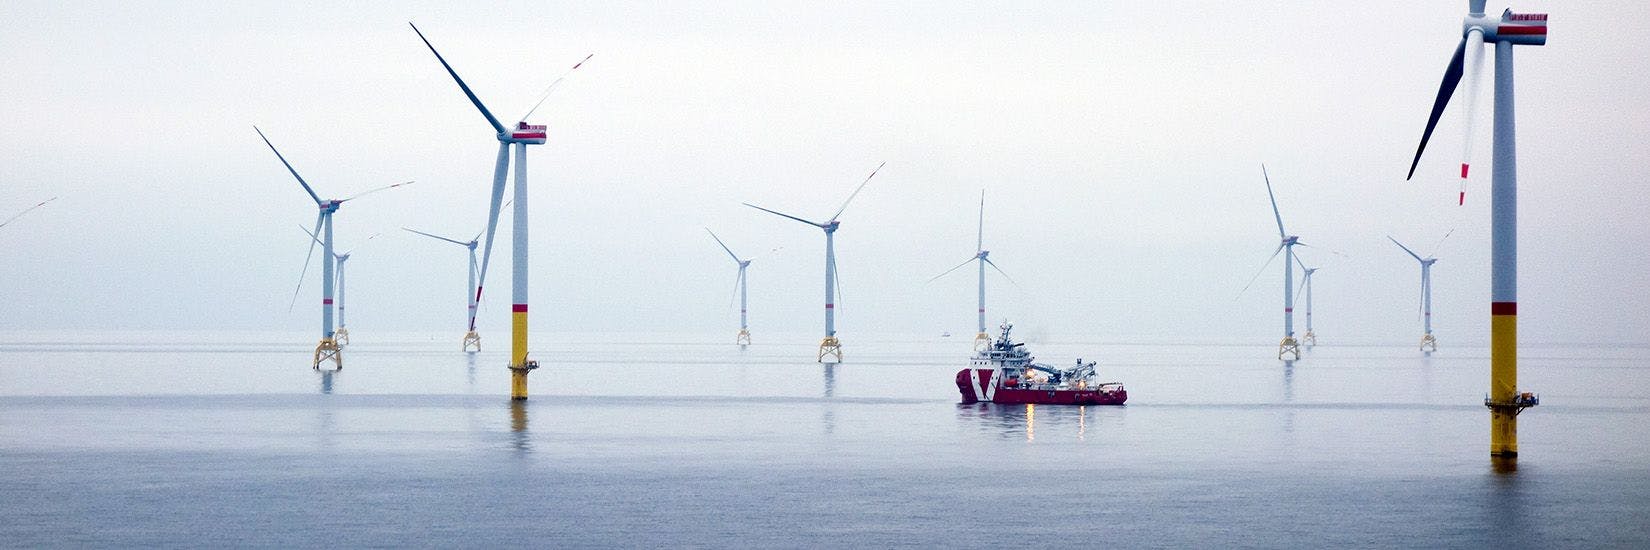 Offshore ship at sea, with wind mills around